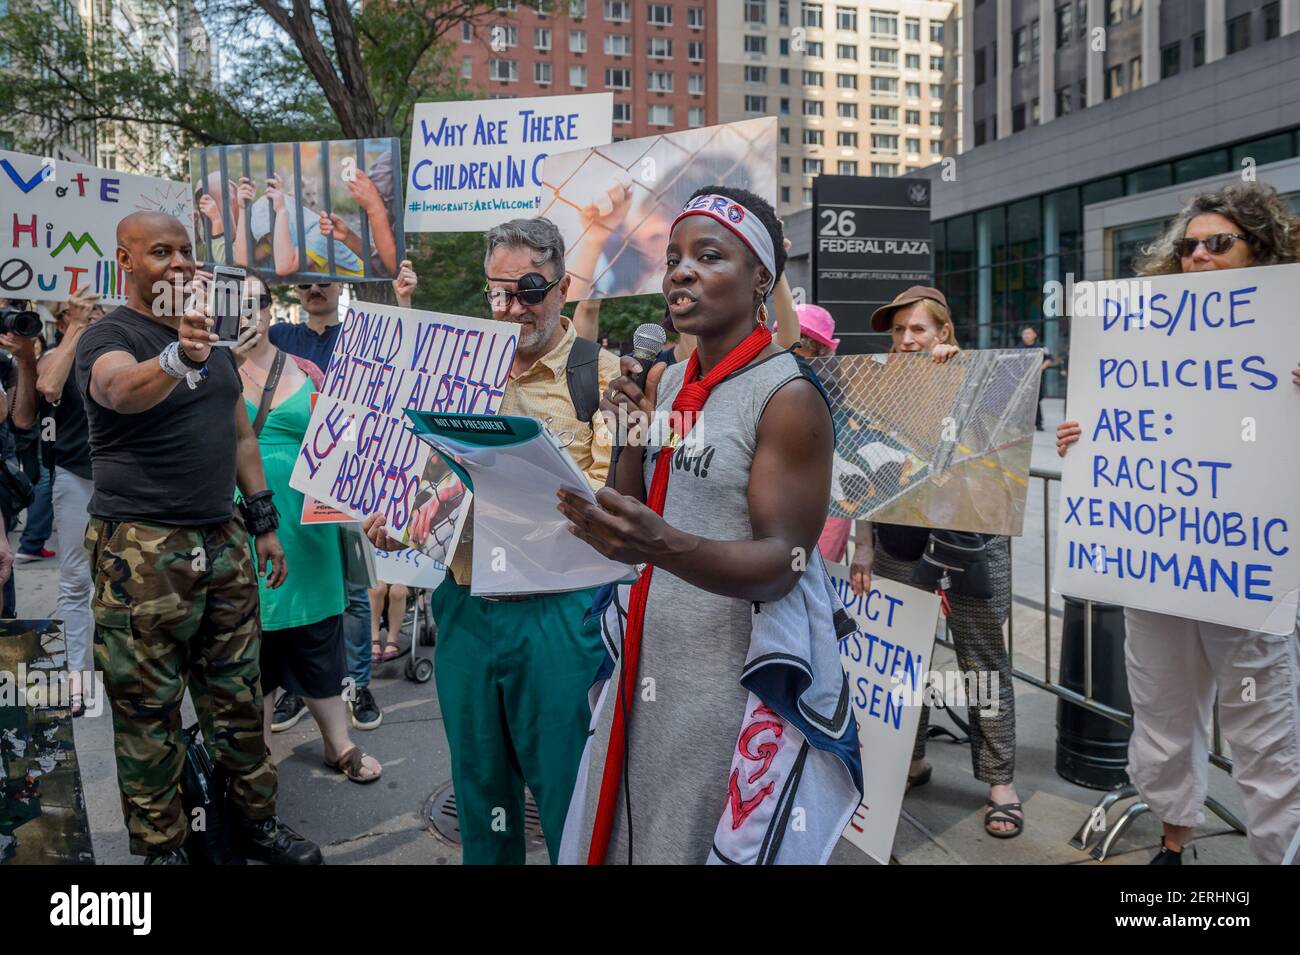 Patricia Okoumou, Statue of Liberty climber - Patricia Okoumou, the woman who scaled the Statue of Liberty, headed back to court on August 28, 2018 for a procedural hearing to schedule Okoumou’s trial date for early November. (Photo by Erik McGregor/Sipa USA) Stock Photo